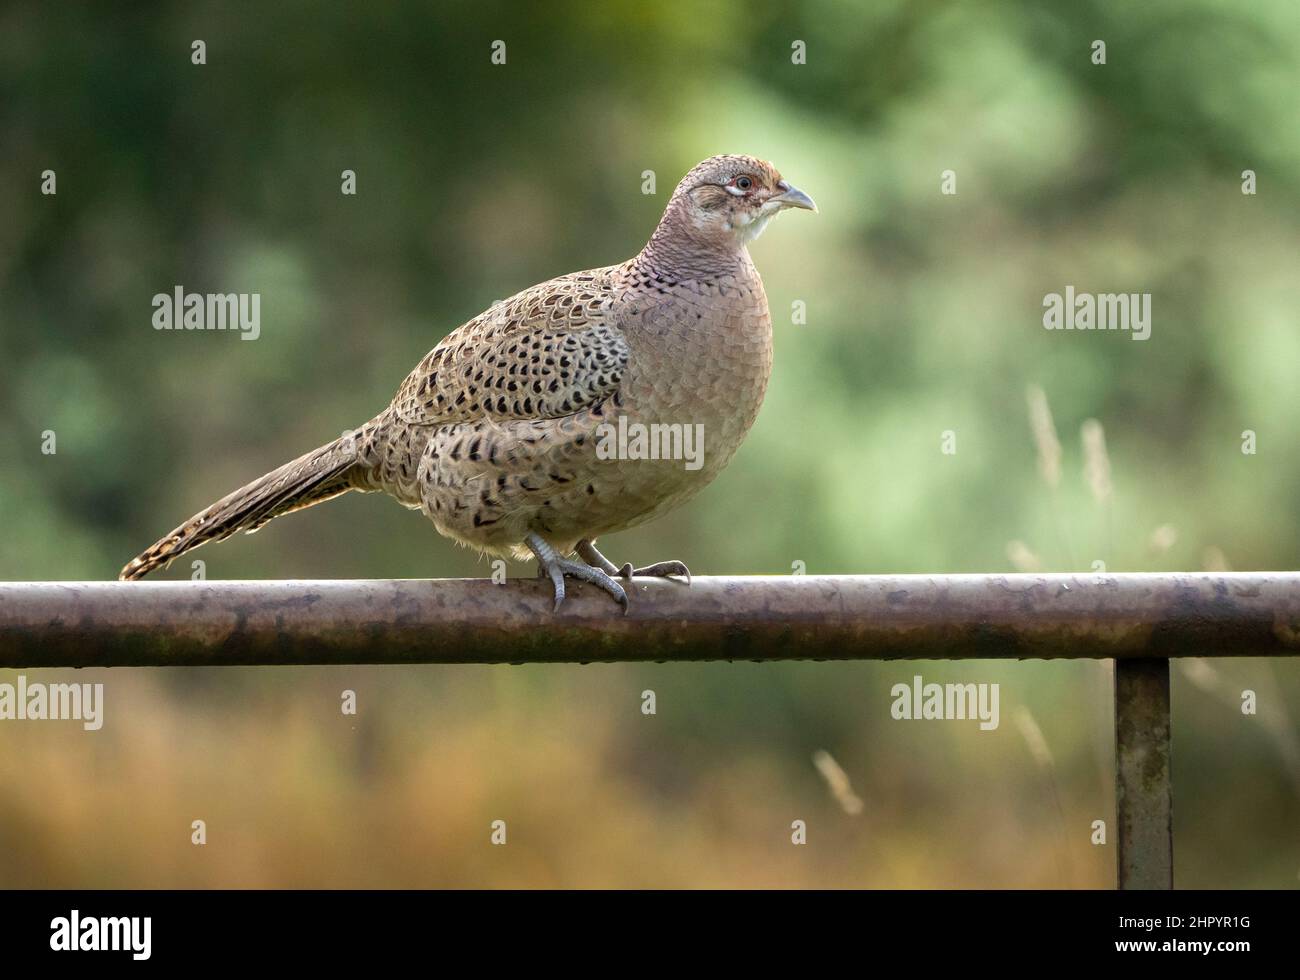 Pheasant (Phasianus colchicus) perched on a fence, England Stock Photo